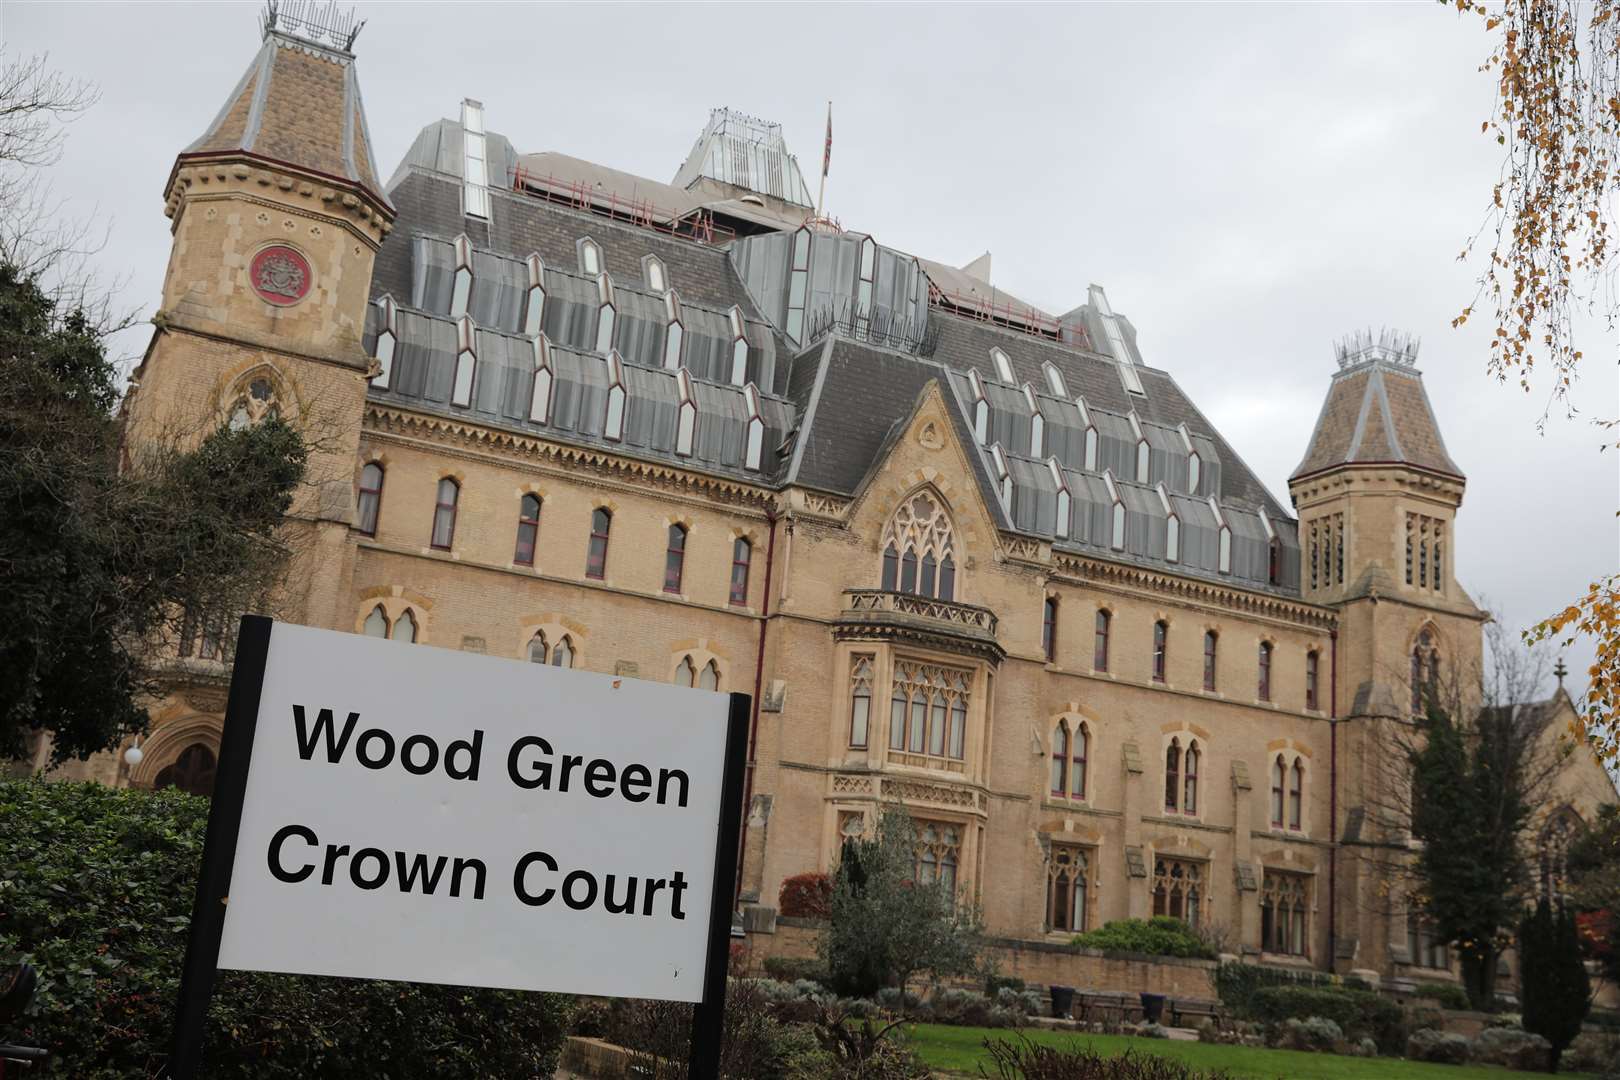 Izzet Eren was on his way to Wood Green Crown Court when the foiled prison break took place (Aaron Chown/PA)